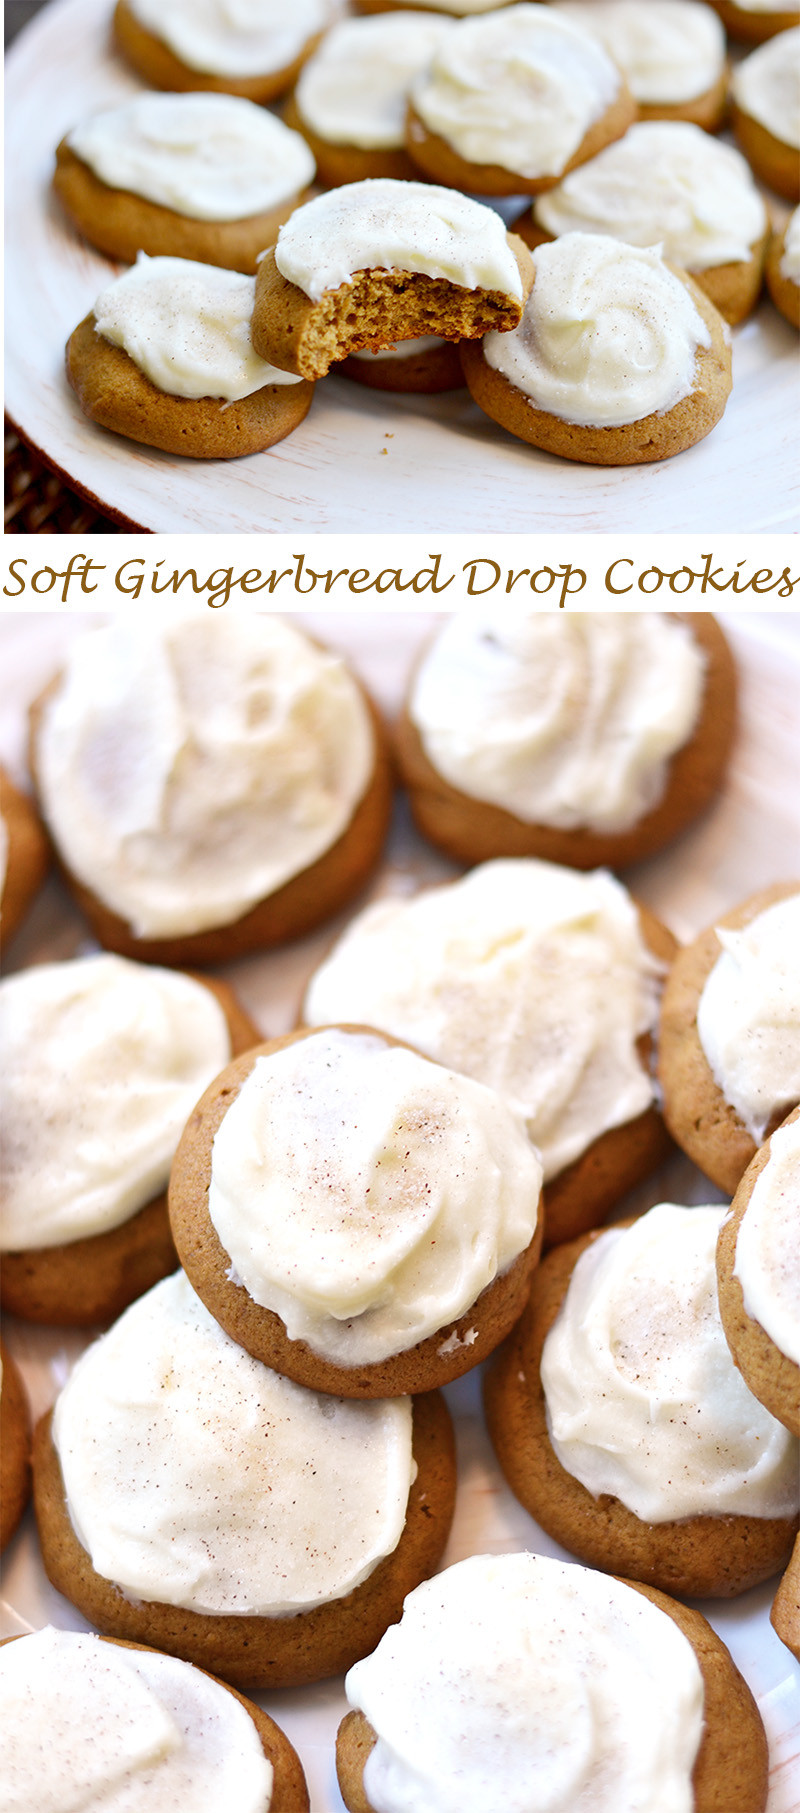 Gingerbread Cookies Soft
 Soft Gingerbread Drop Cookies with Cream Cheese Frosting